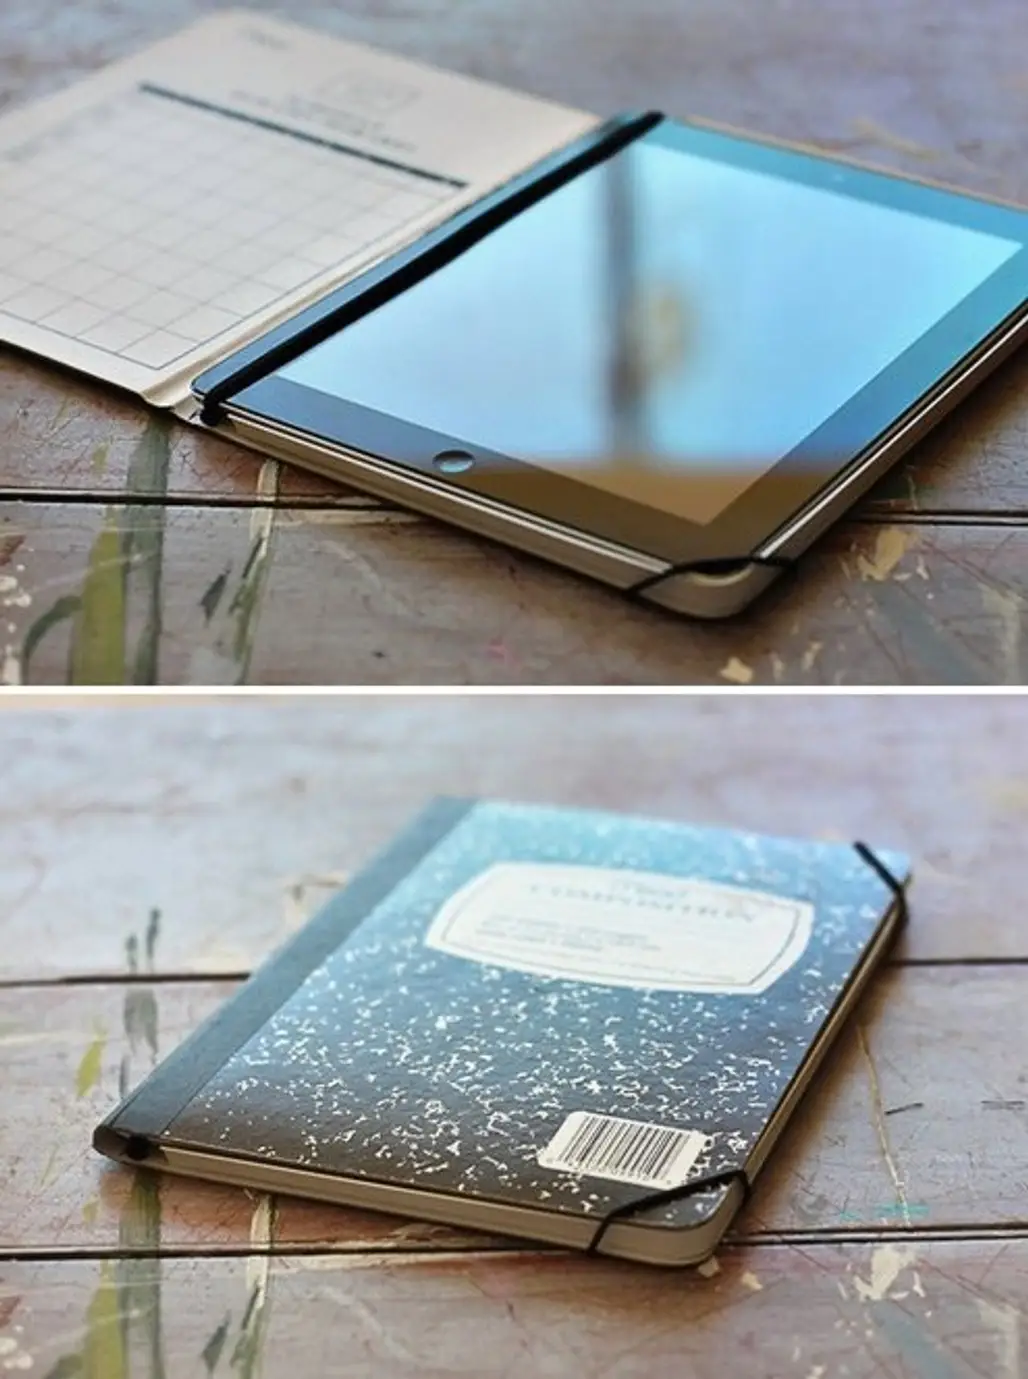 Make a Stylish IPad Case from a Notebook